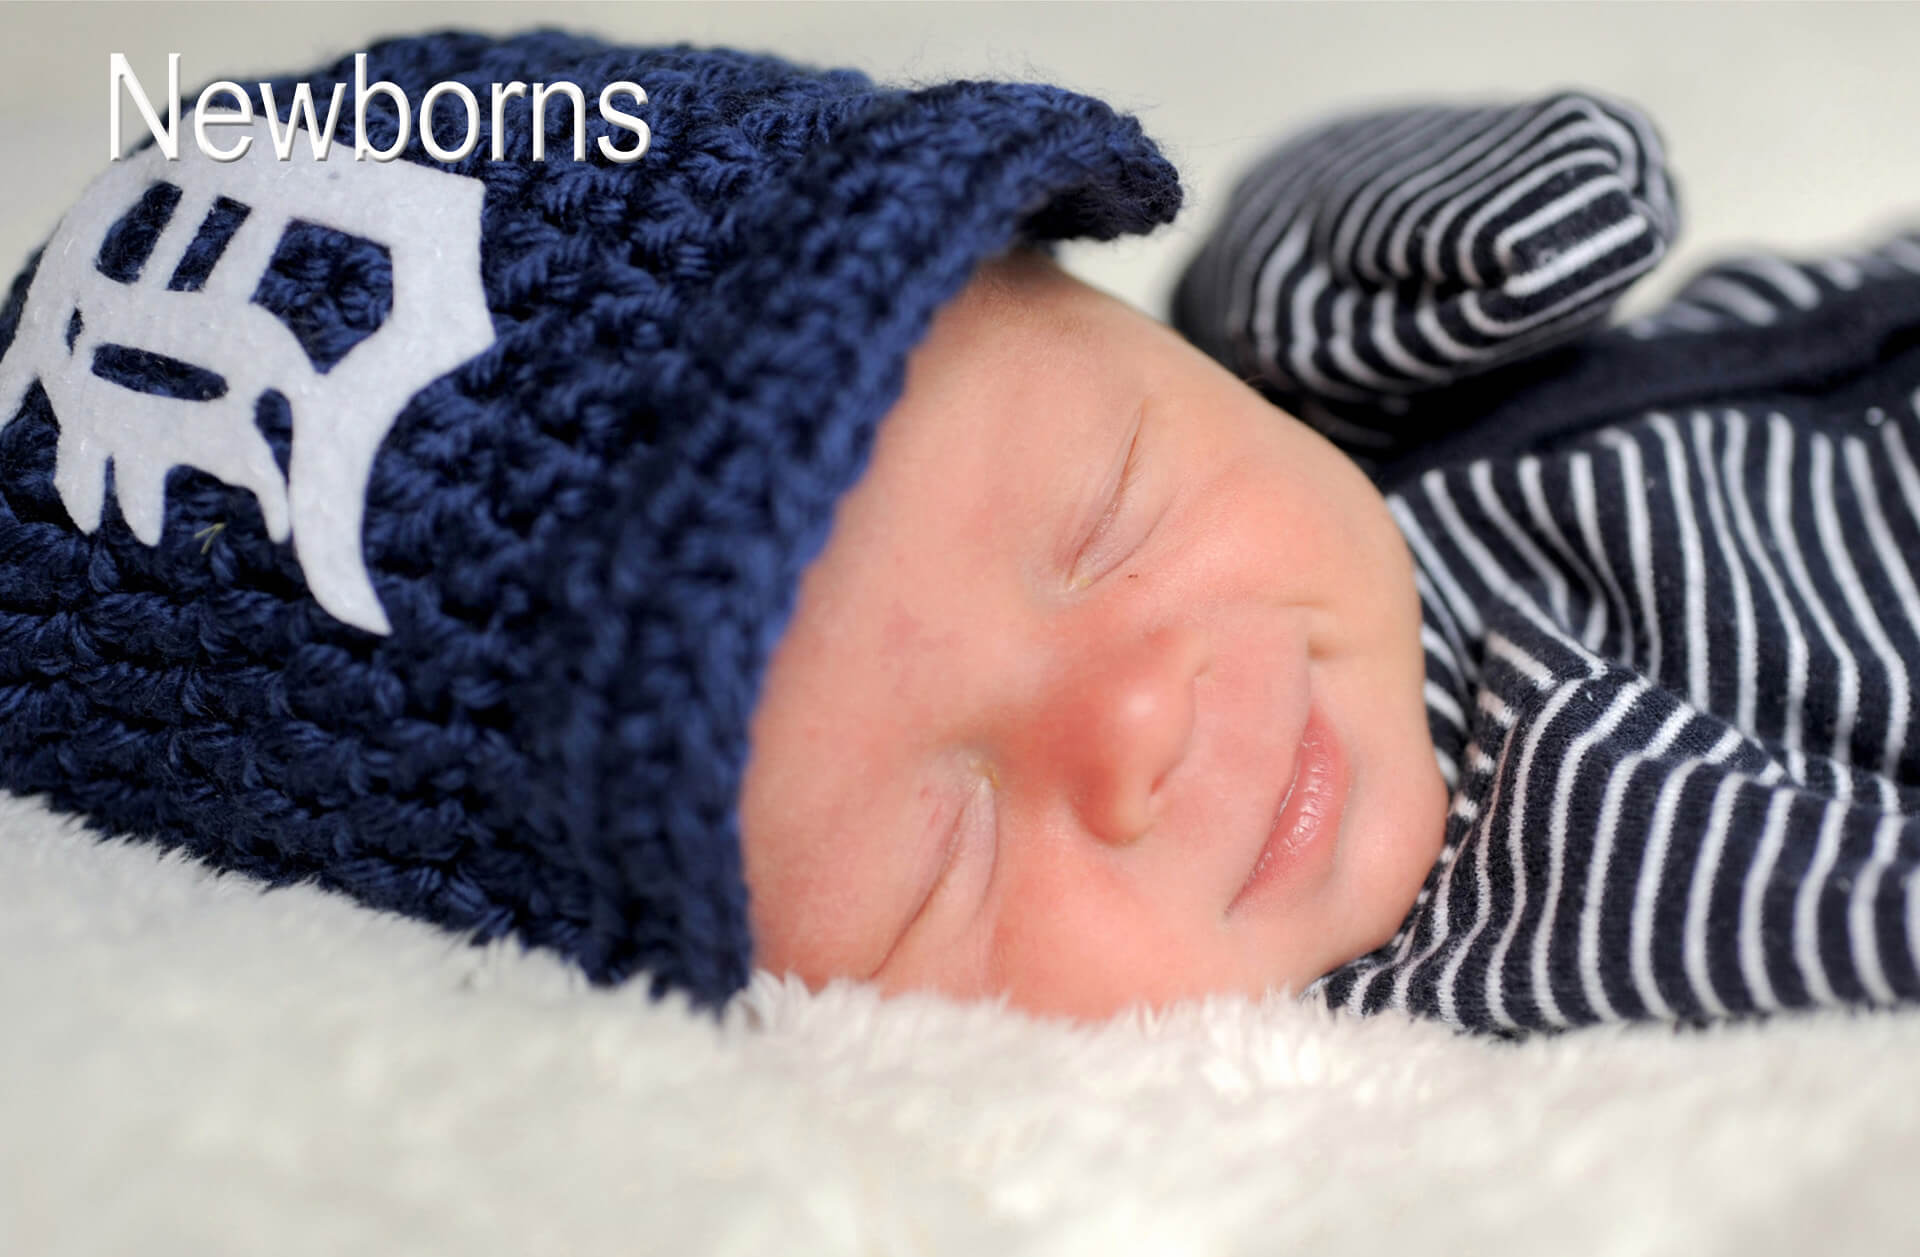 A newborn Detroit Tigers baby is photographed by newborn photographer Marci Curtis is the metro Detroit area of Michigan.